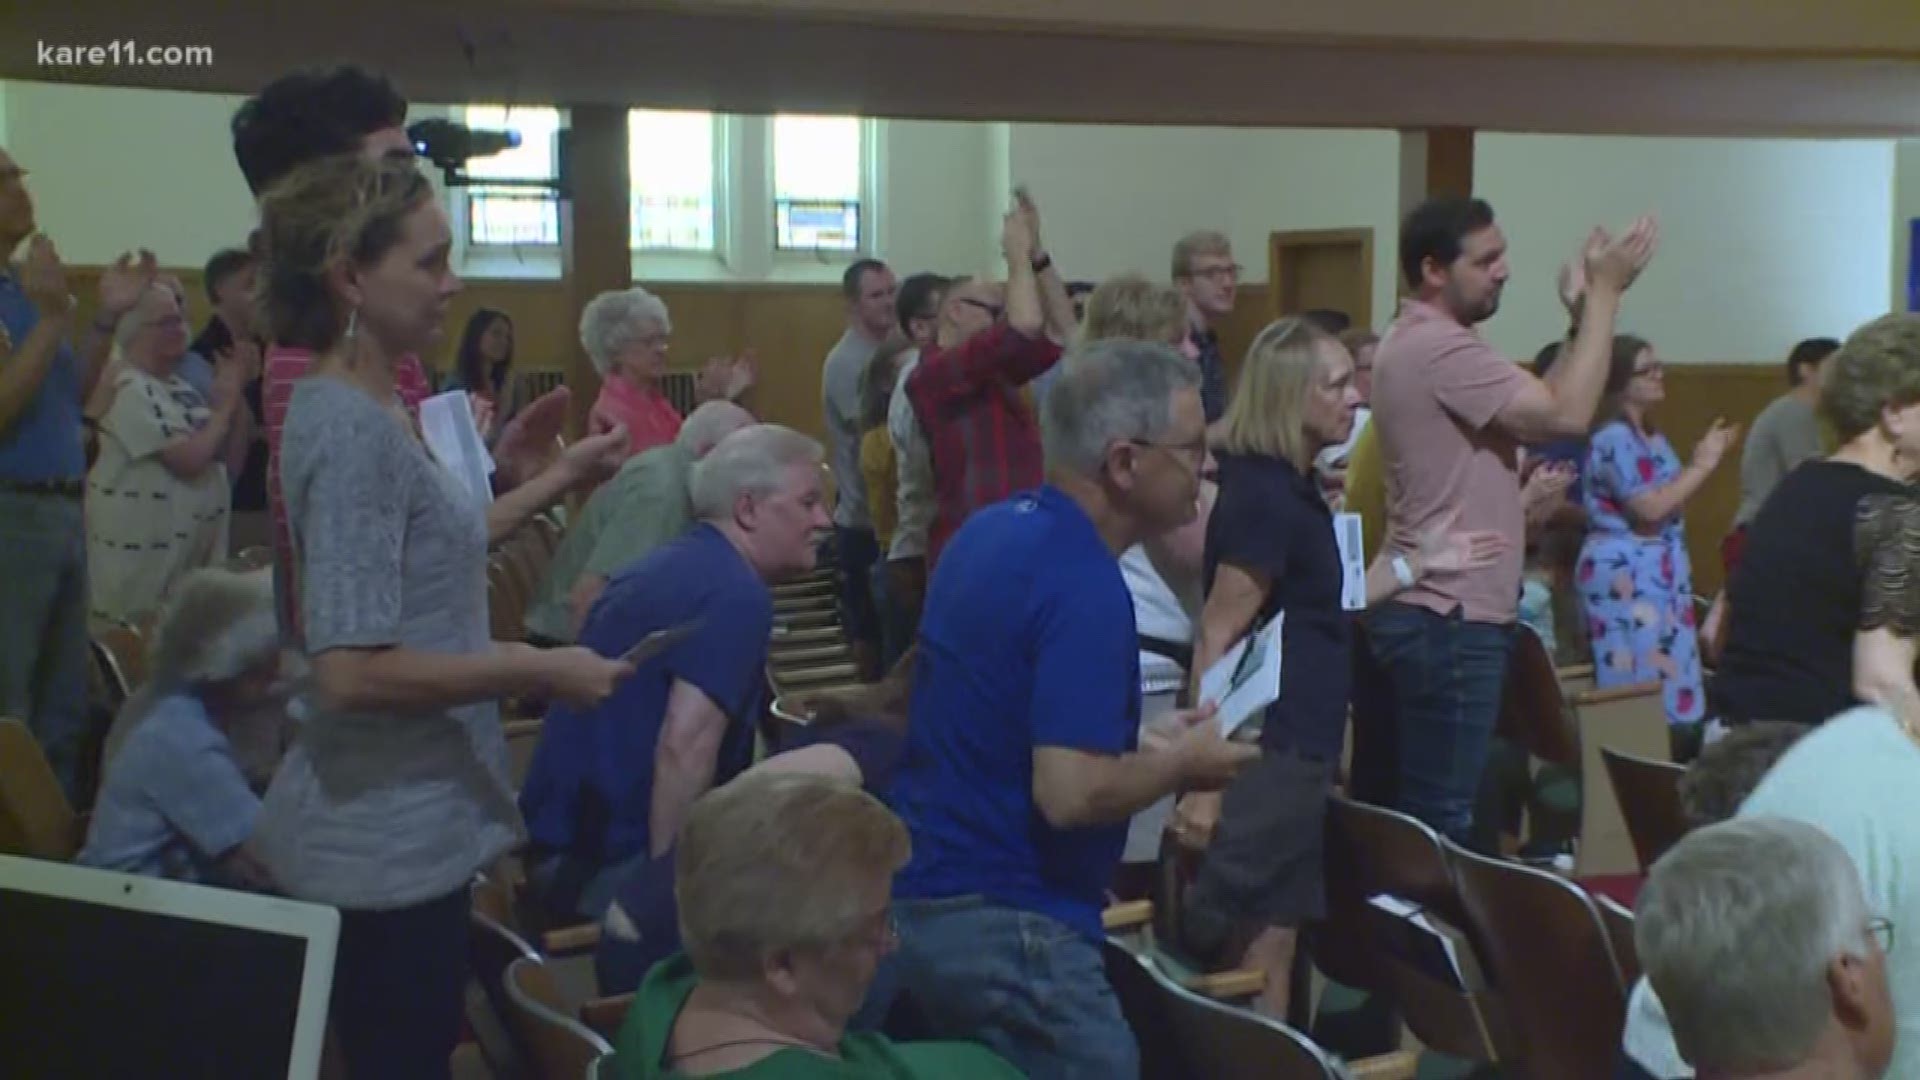 The defrocked pastor of an expelled Minneapolis church returned to the pulpit Sunday to a standing ovation from his congregation.